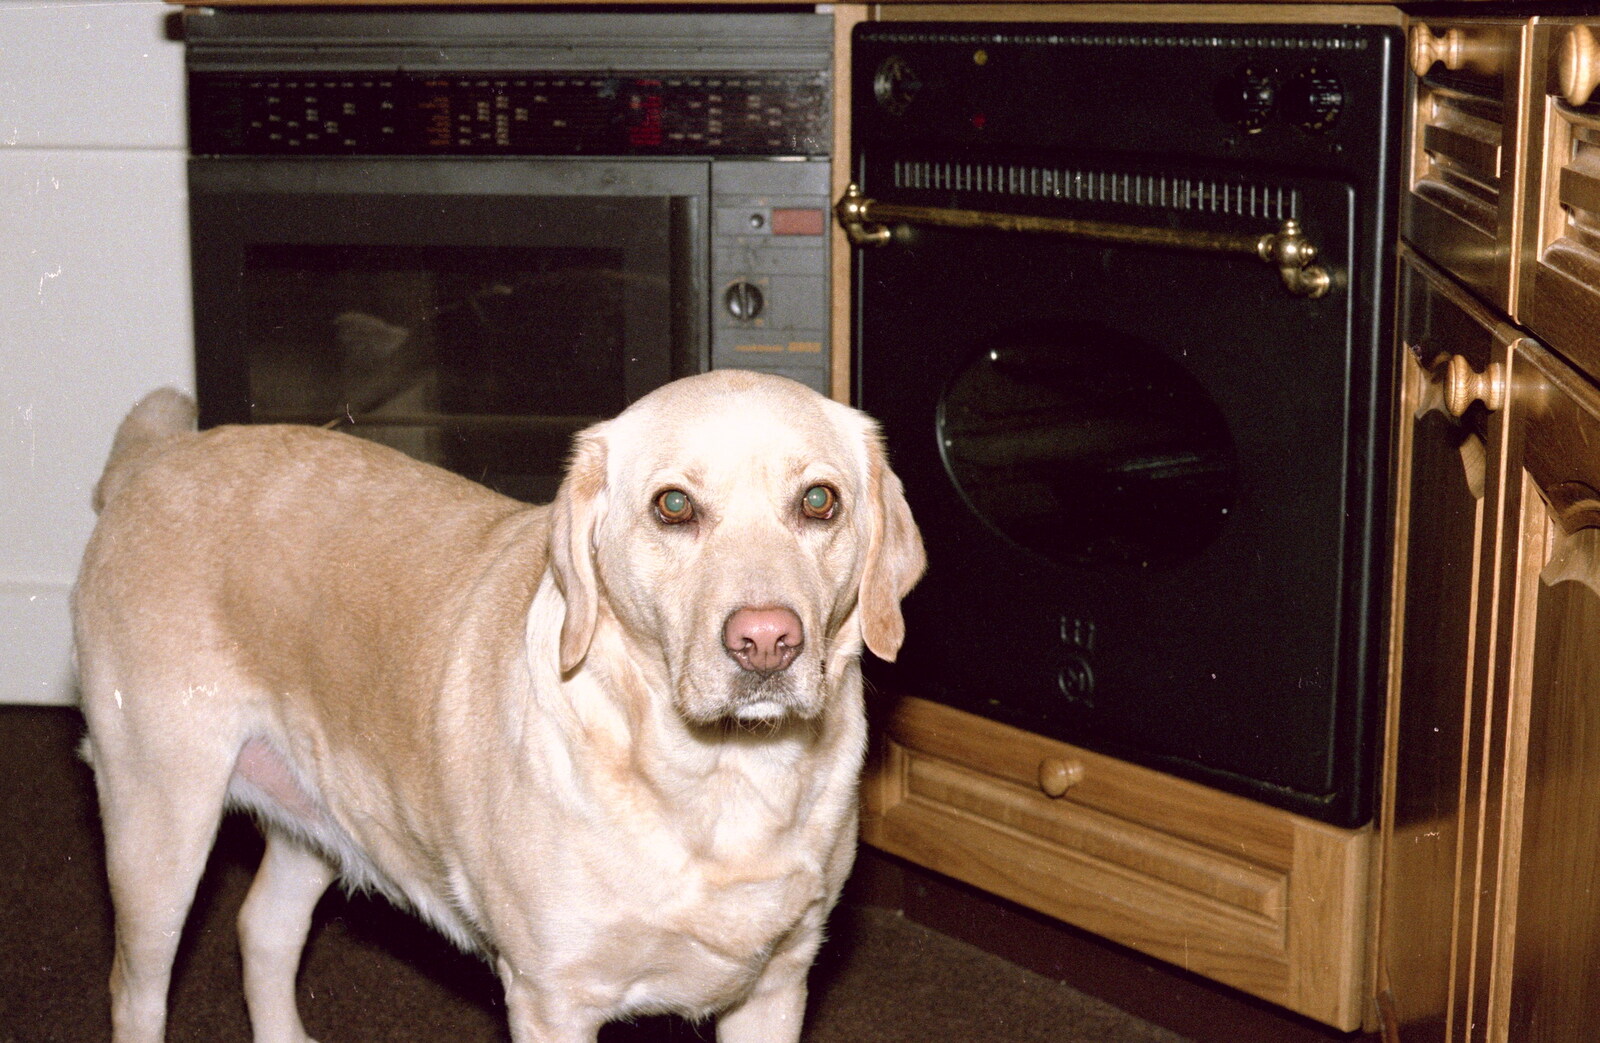 Brandy lurks in the kitchen from Christmas in Macclesfield and Wetherby, Cheshire  and Yorkshire - 25th December 1985